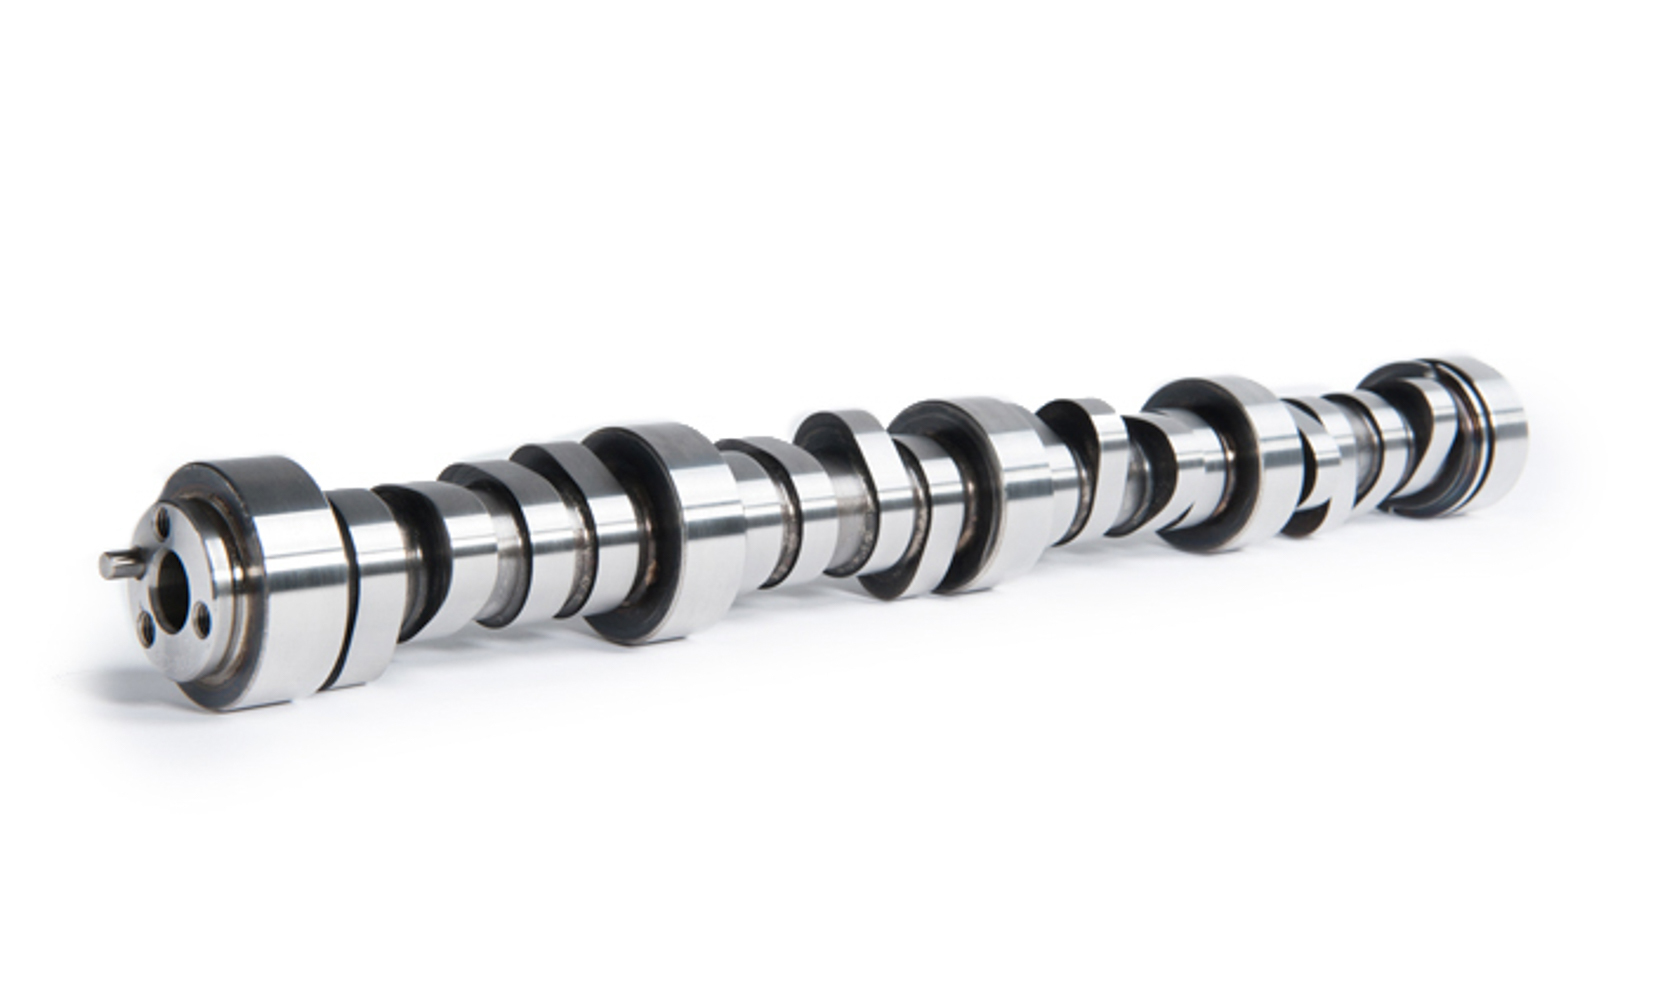 Cam Motion 03-01-0108 Camshaft, Stage 2, Hydraulic Roller, Lift 0.553 / 0.553 in, Duration 210 / 216, 116 LSA, 2500 / 6000 RPM, GM LS-Series, Each